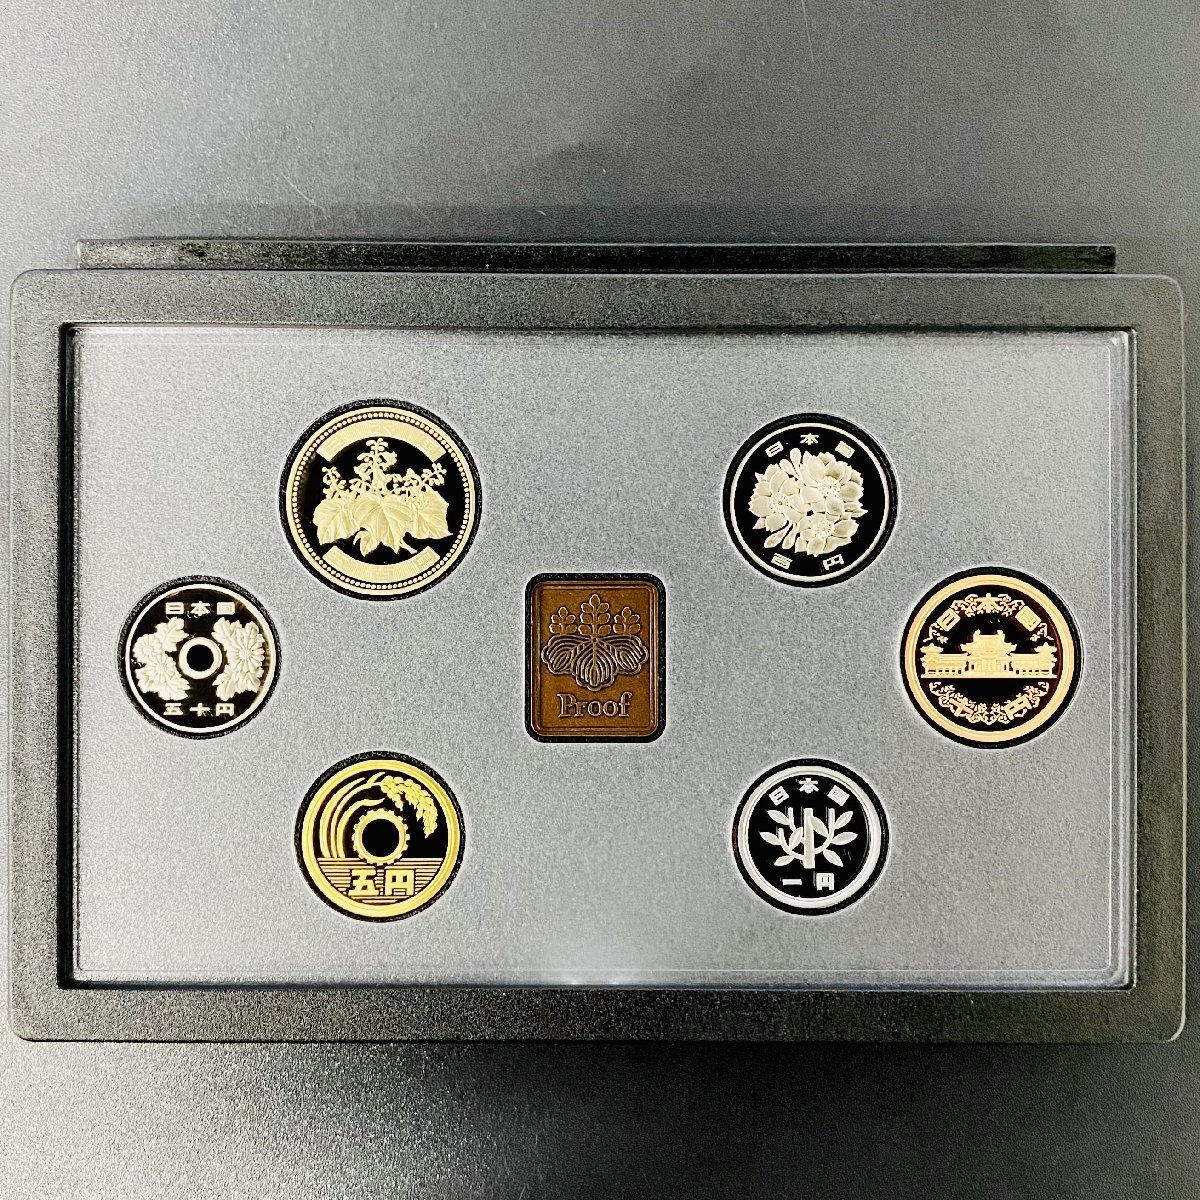 1 jpy ~ 2021 year . peace 3 year general proof money set face value 666 jpy year . board have all .. commemorative coin memory money money collection . Japan jpy limitation money P2021